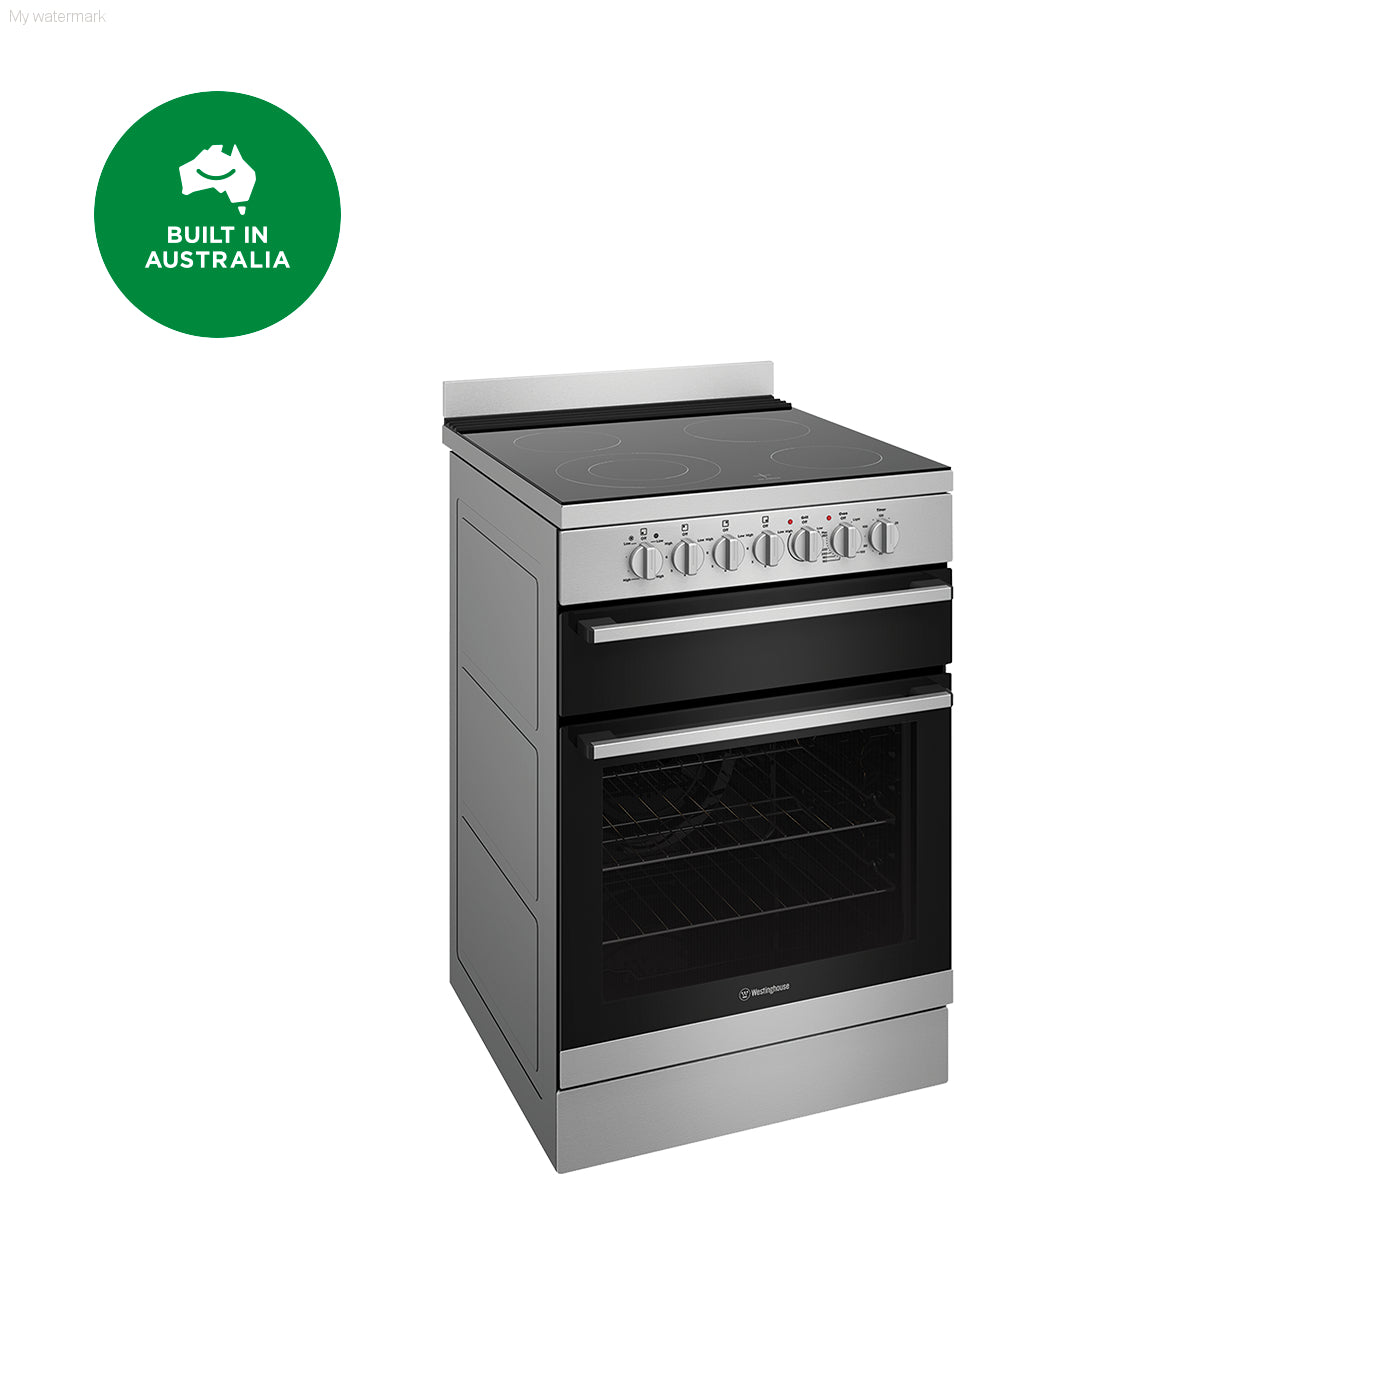 Westinghouse 60cm Electric Freestanding Oven